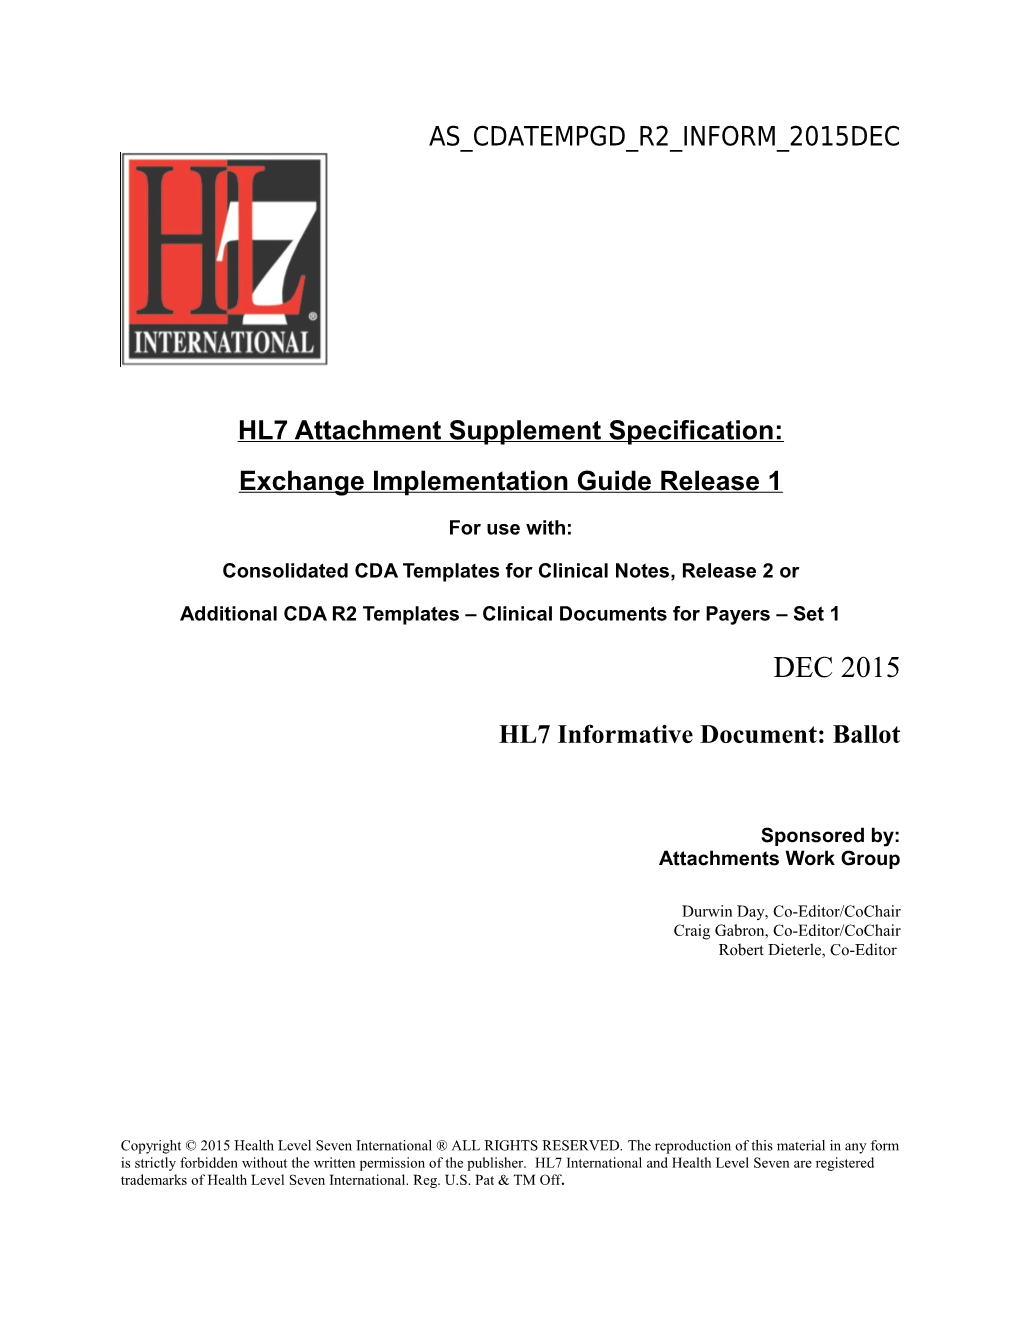 CDAR2 IG Supplement to IHE Consolidated Templated Guide